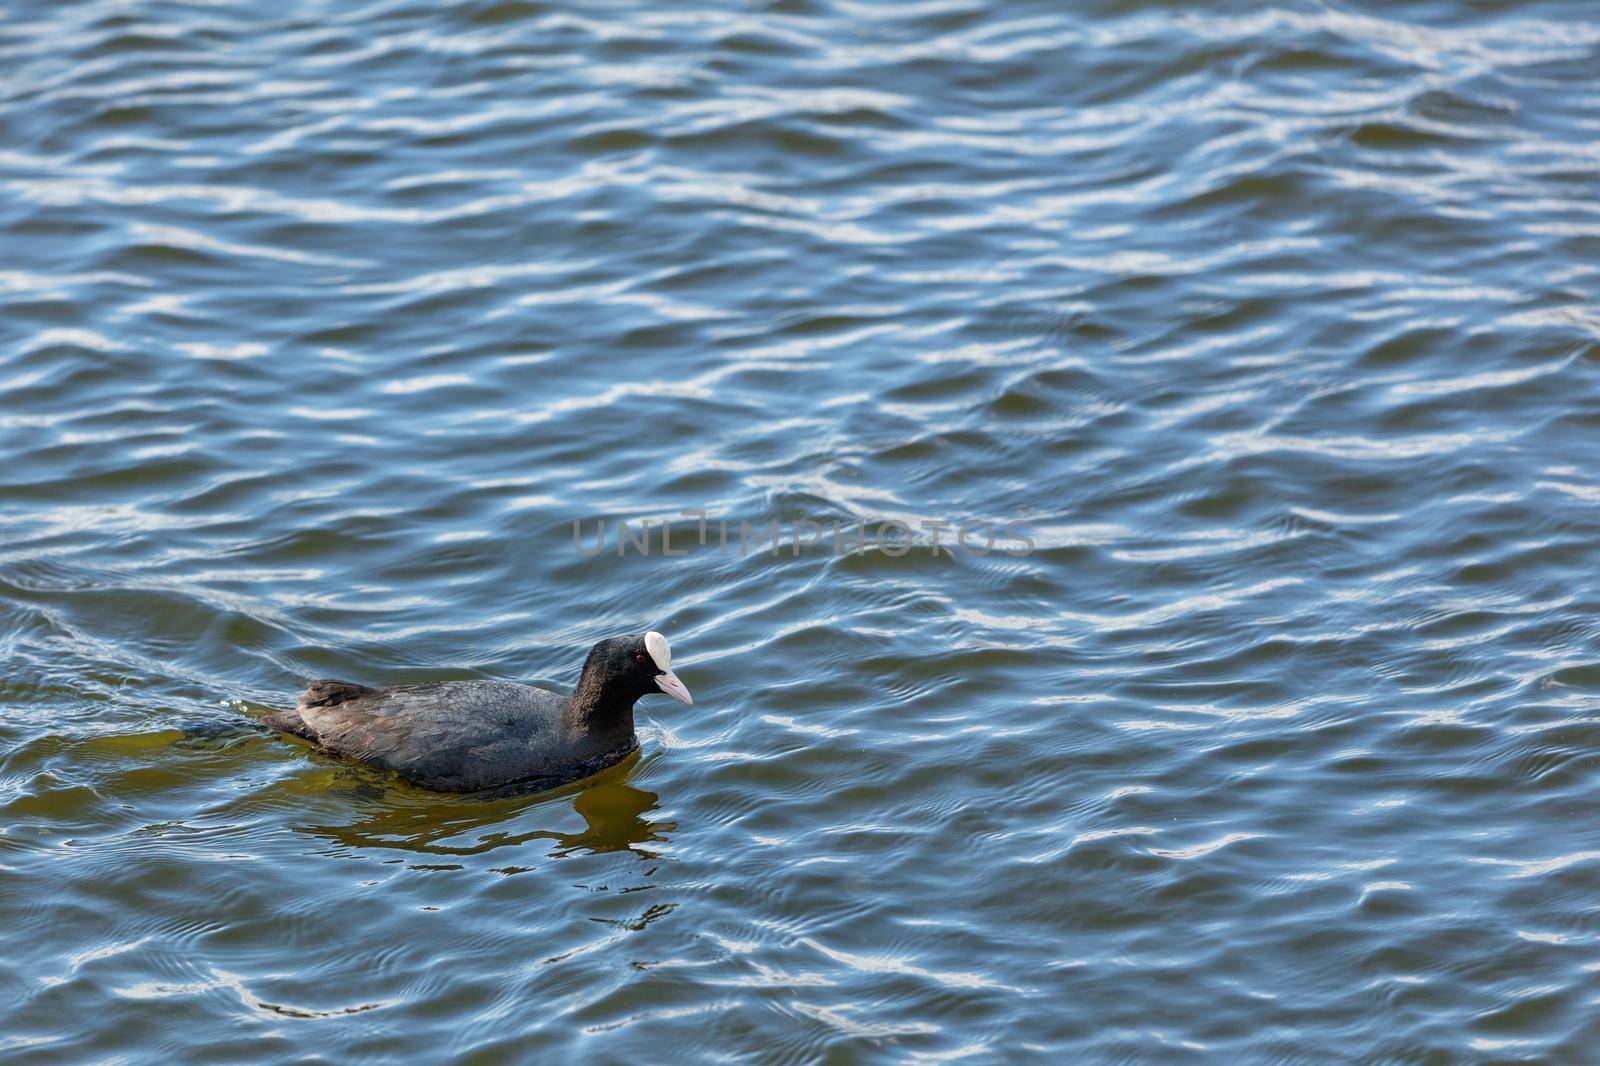 A wild coot bird with black textured plumage and white forehead quickly swims along the surface of the river. Aquatic waterfowls. Copy space.